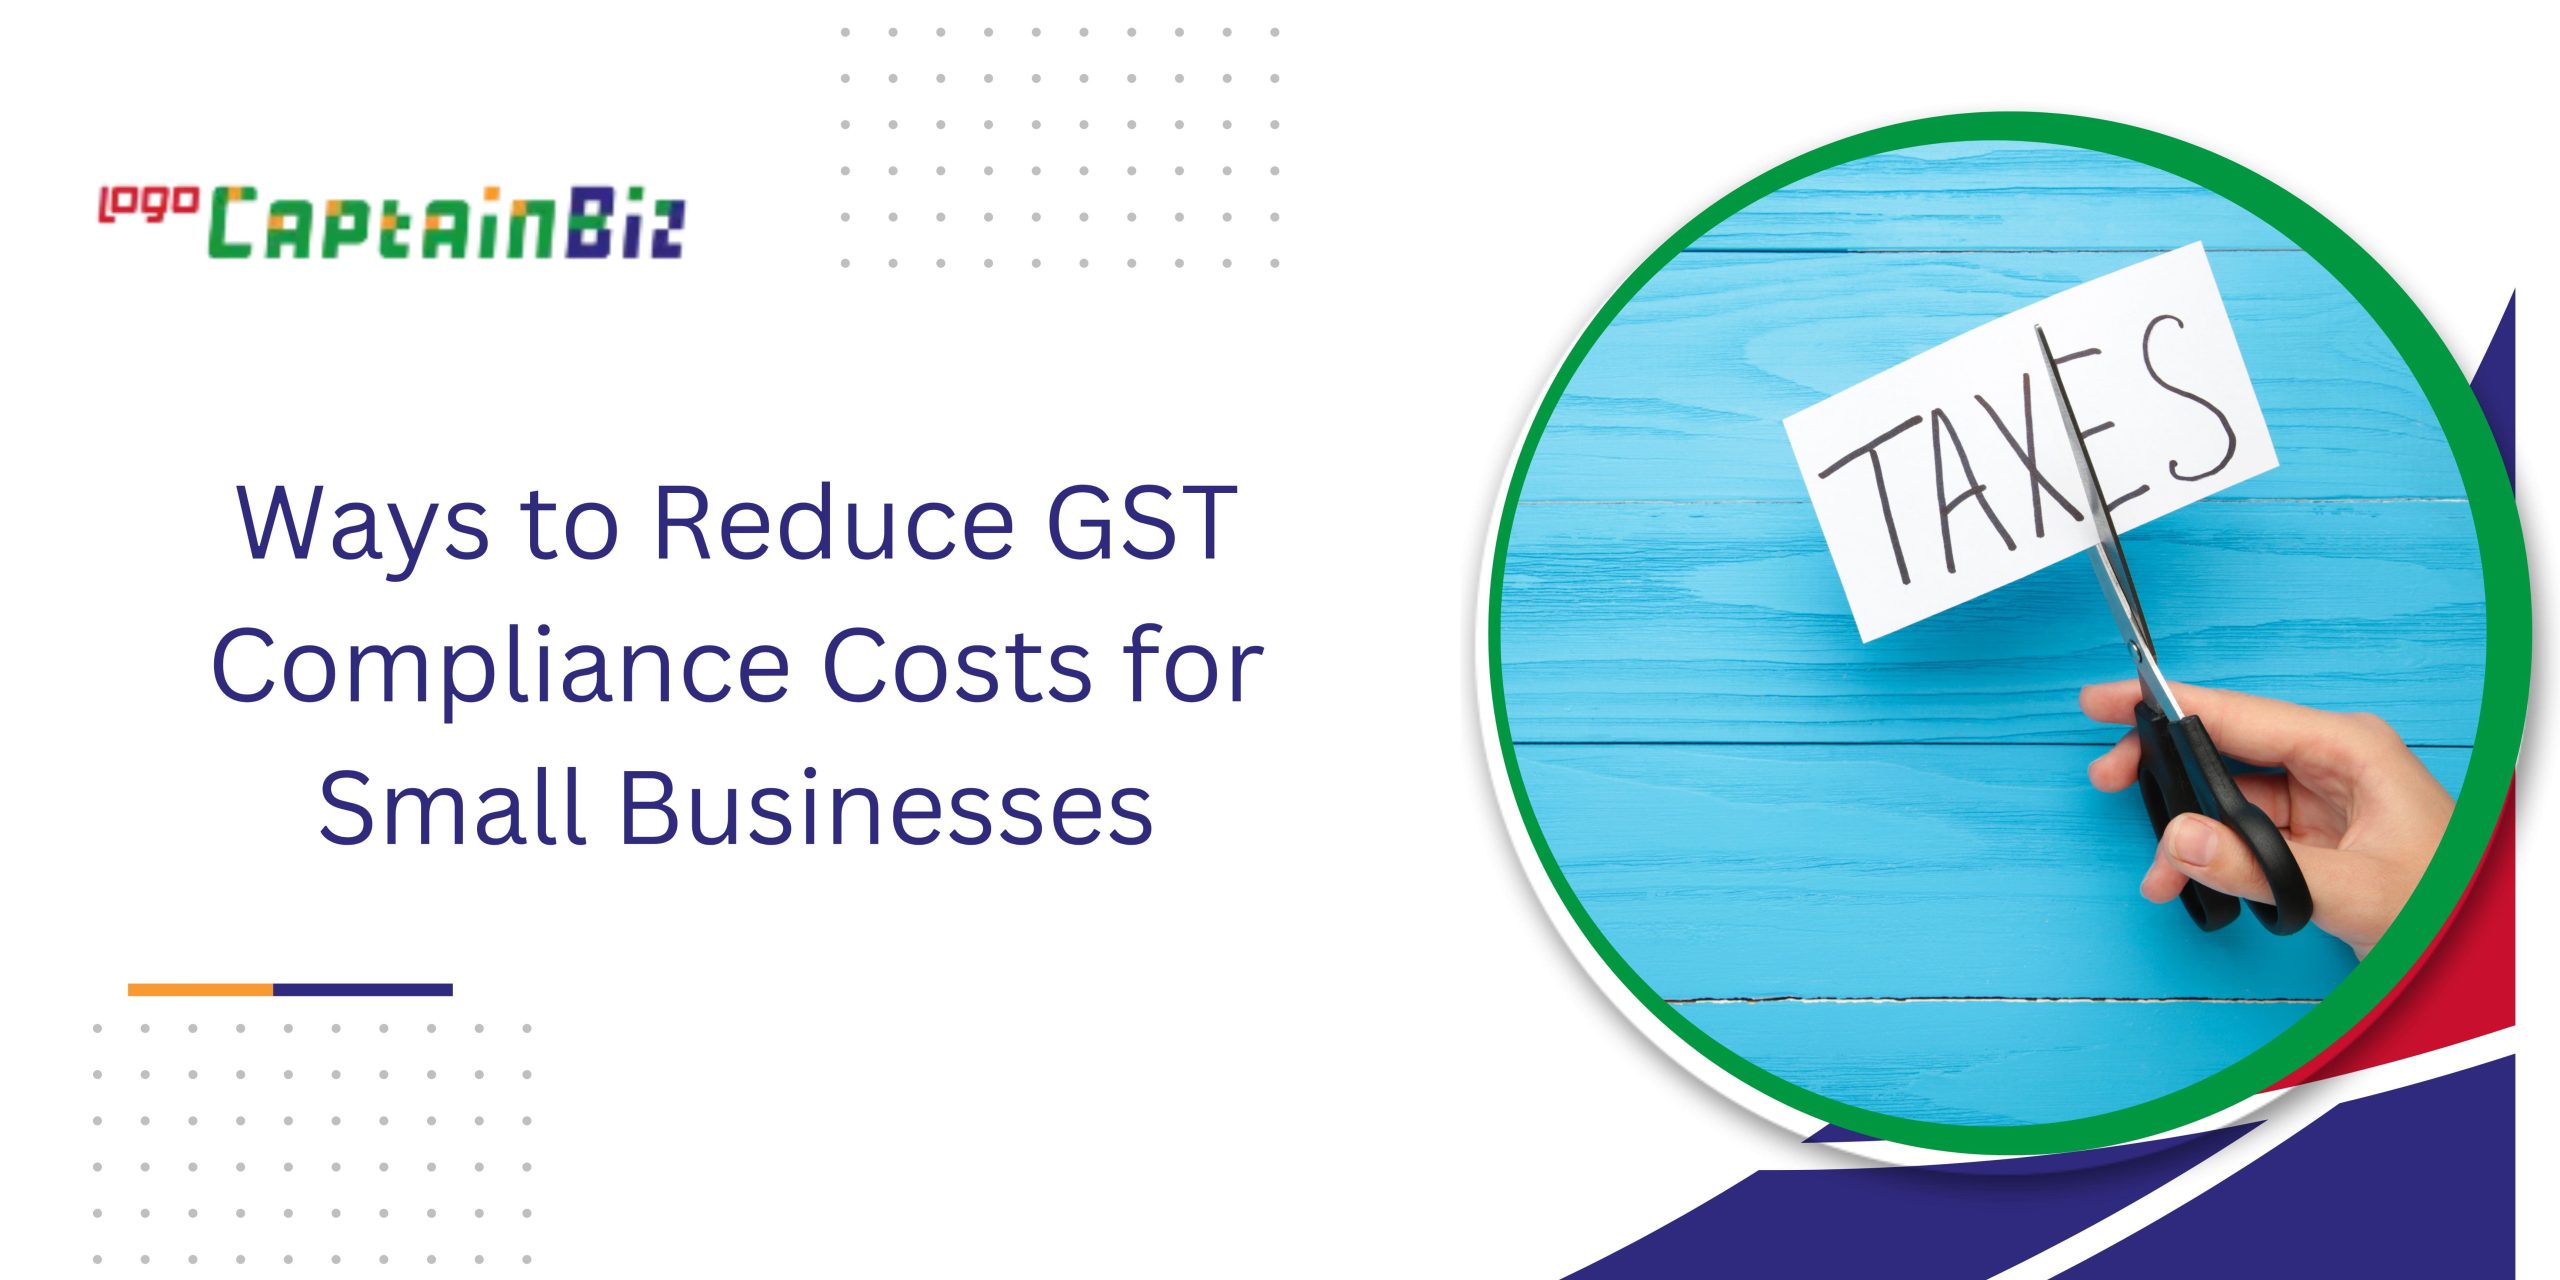 Ways to Reduce GST Compliance Costs for Small Businesses